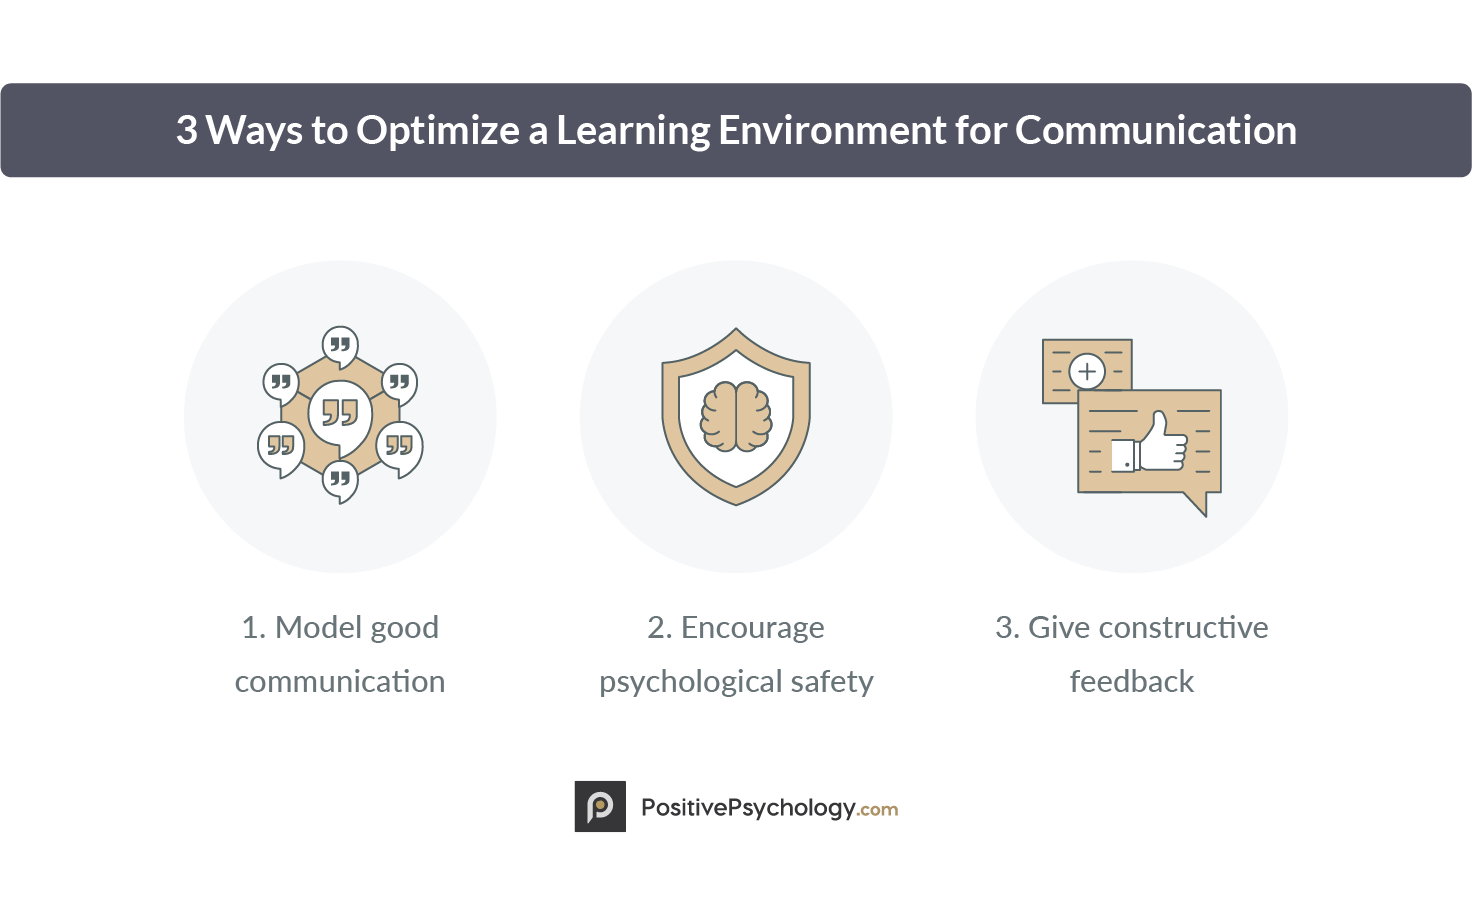 3 Ways to Optimize a Learning Environment for Communication